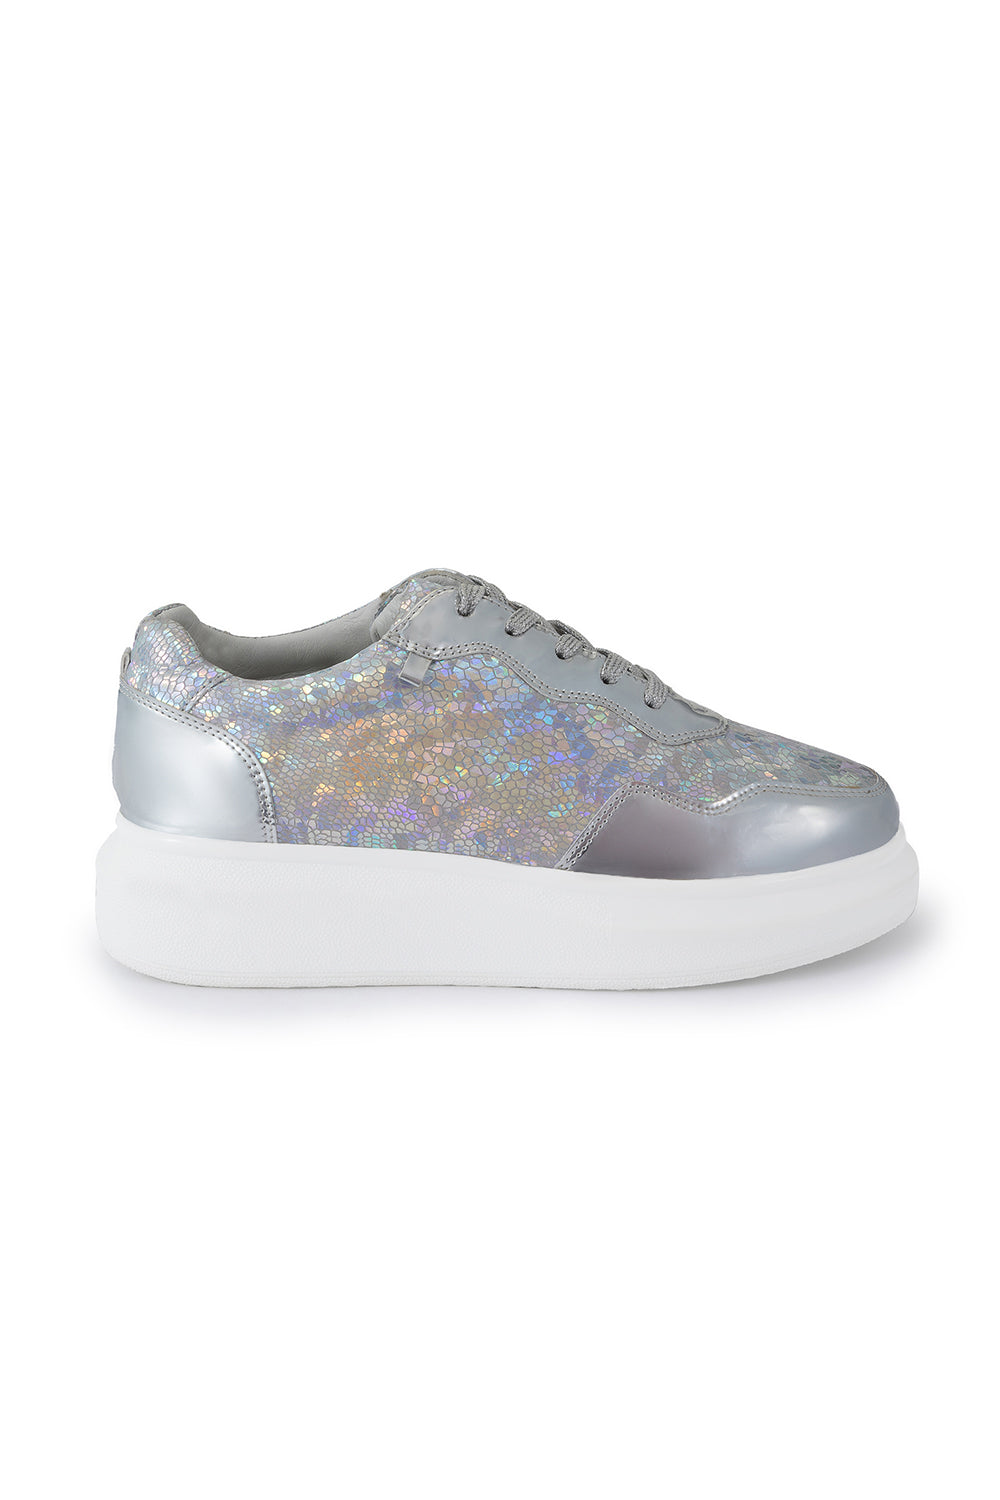 Silver Disco 22 Classic Wedge Sneakers